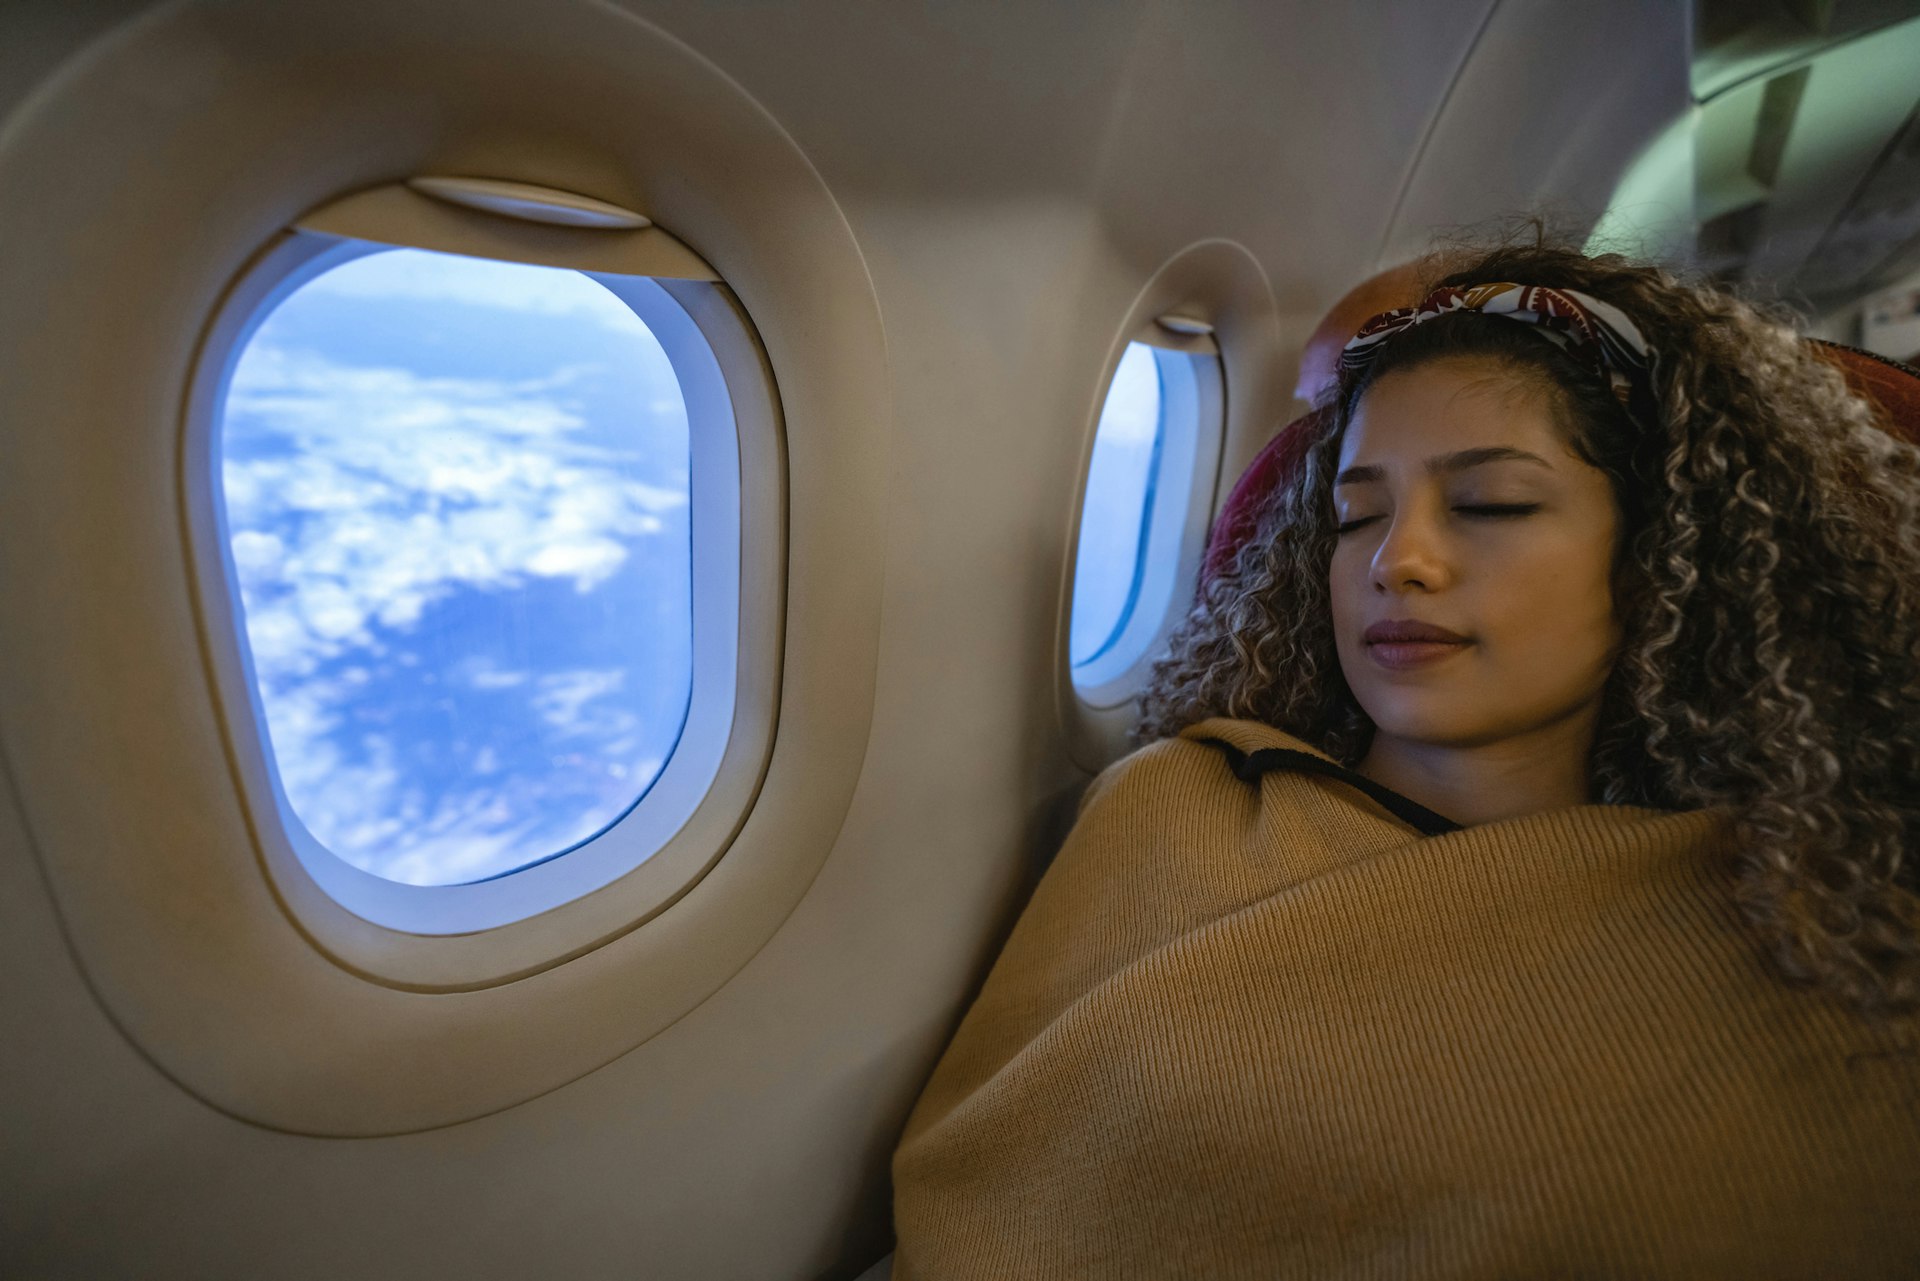 A woman sleeps under a blanket next to a plane window. The blind is up, revealing clouds below. Taking a longer first leg may help get extra sleep, which can reduce jet lag.